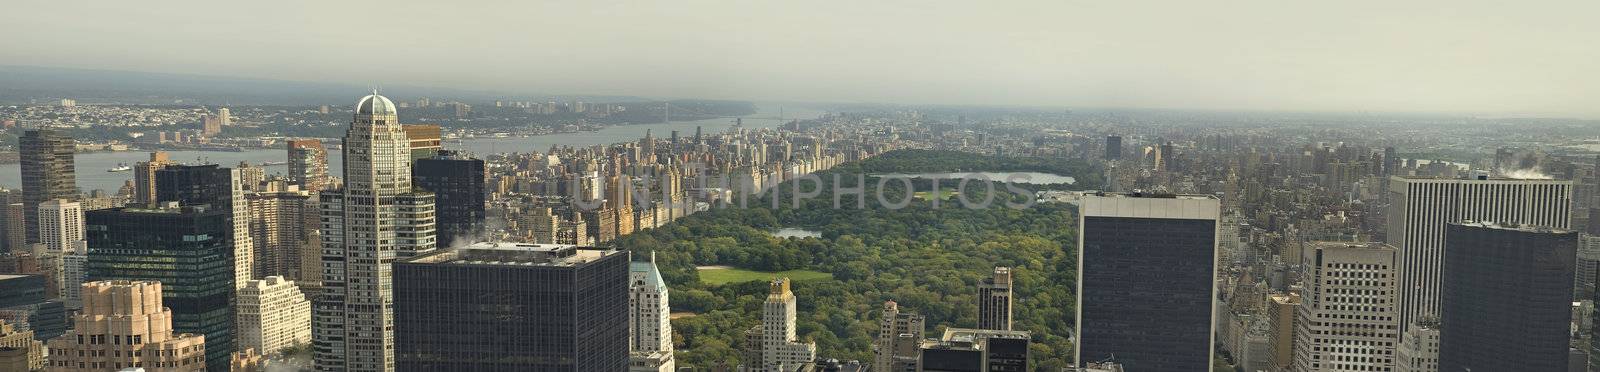 central park panorama by rorem